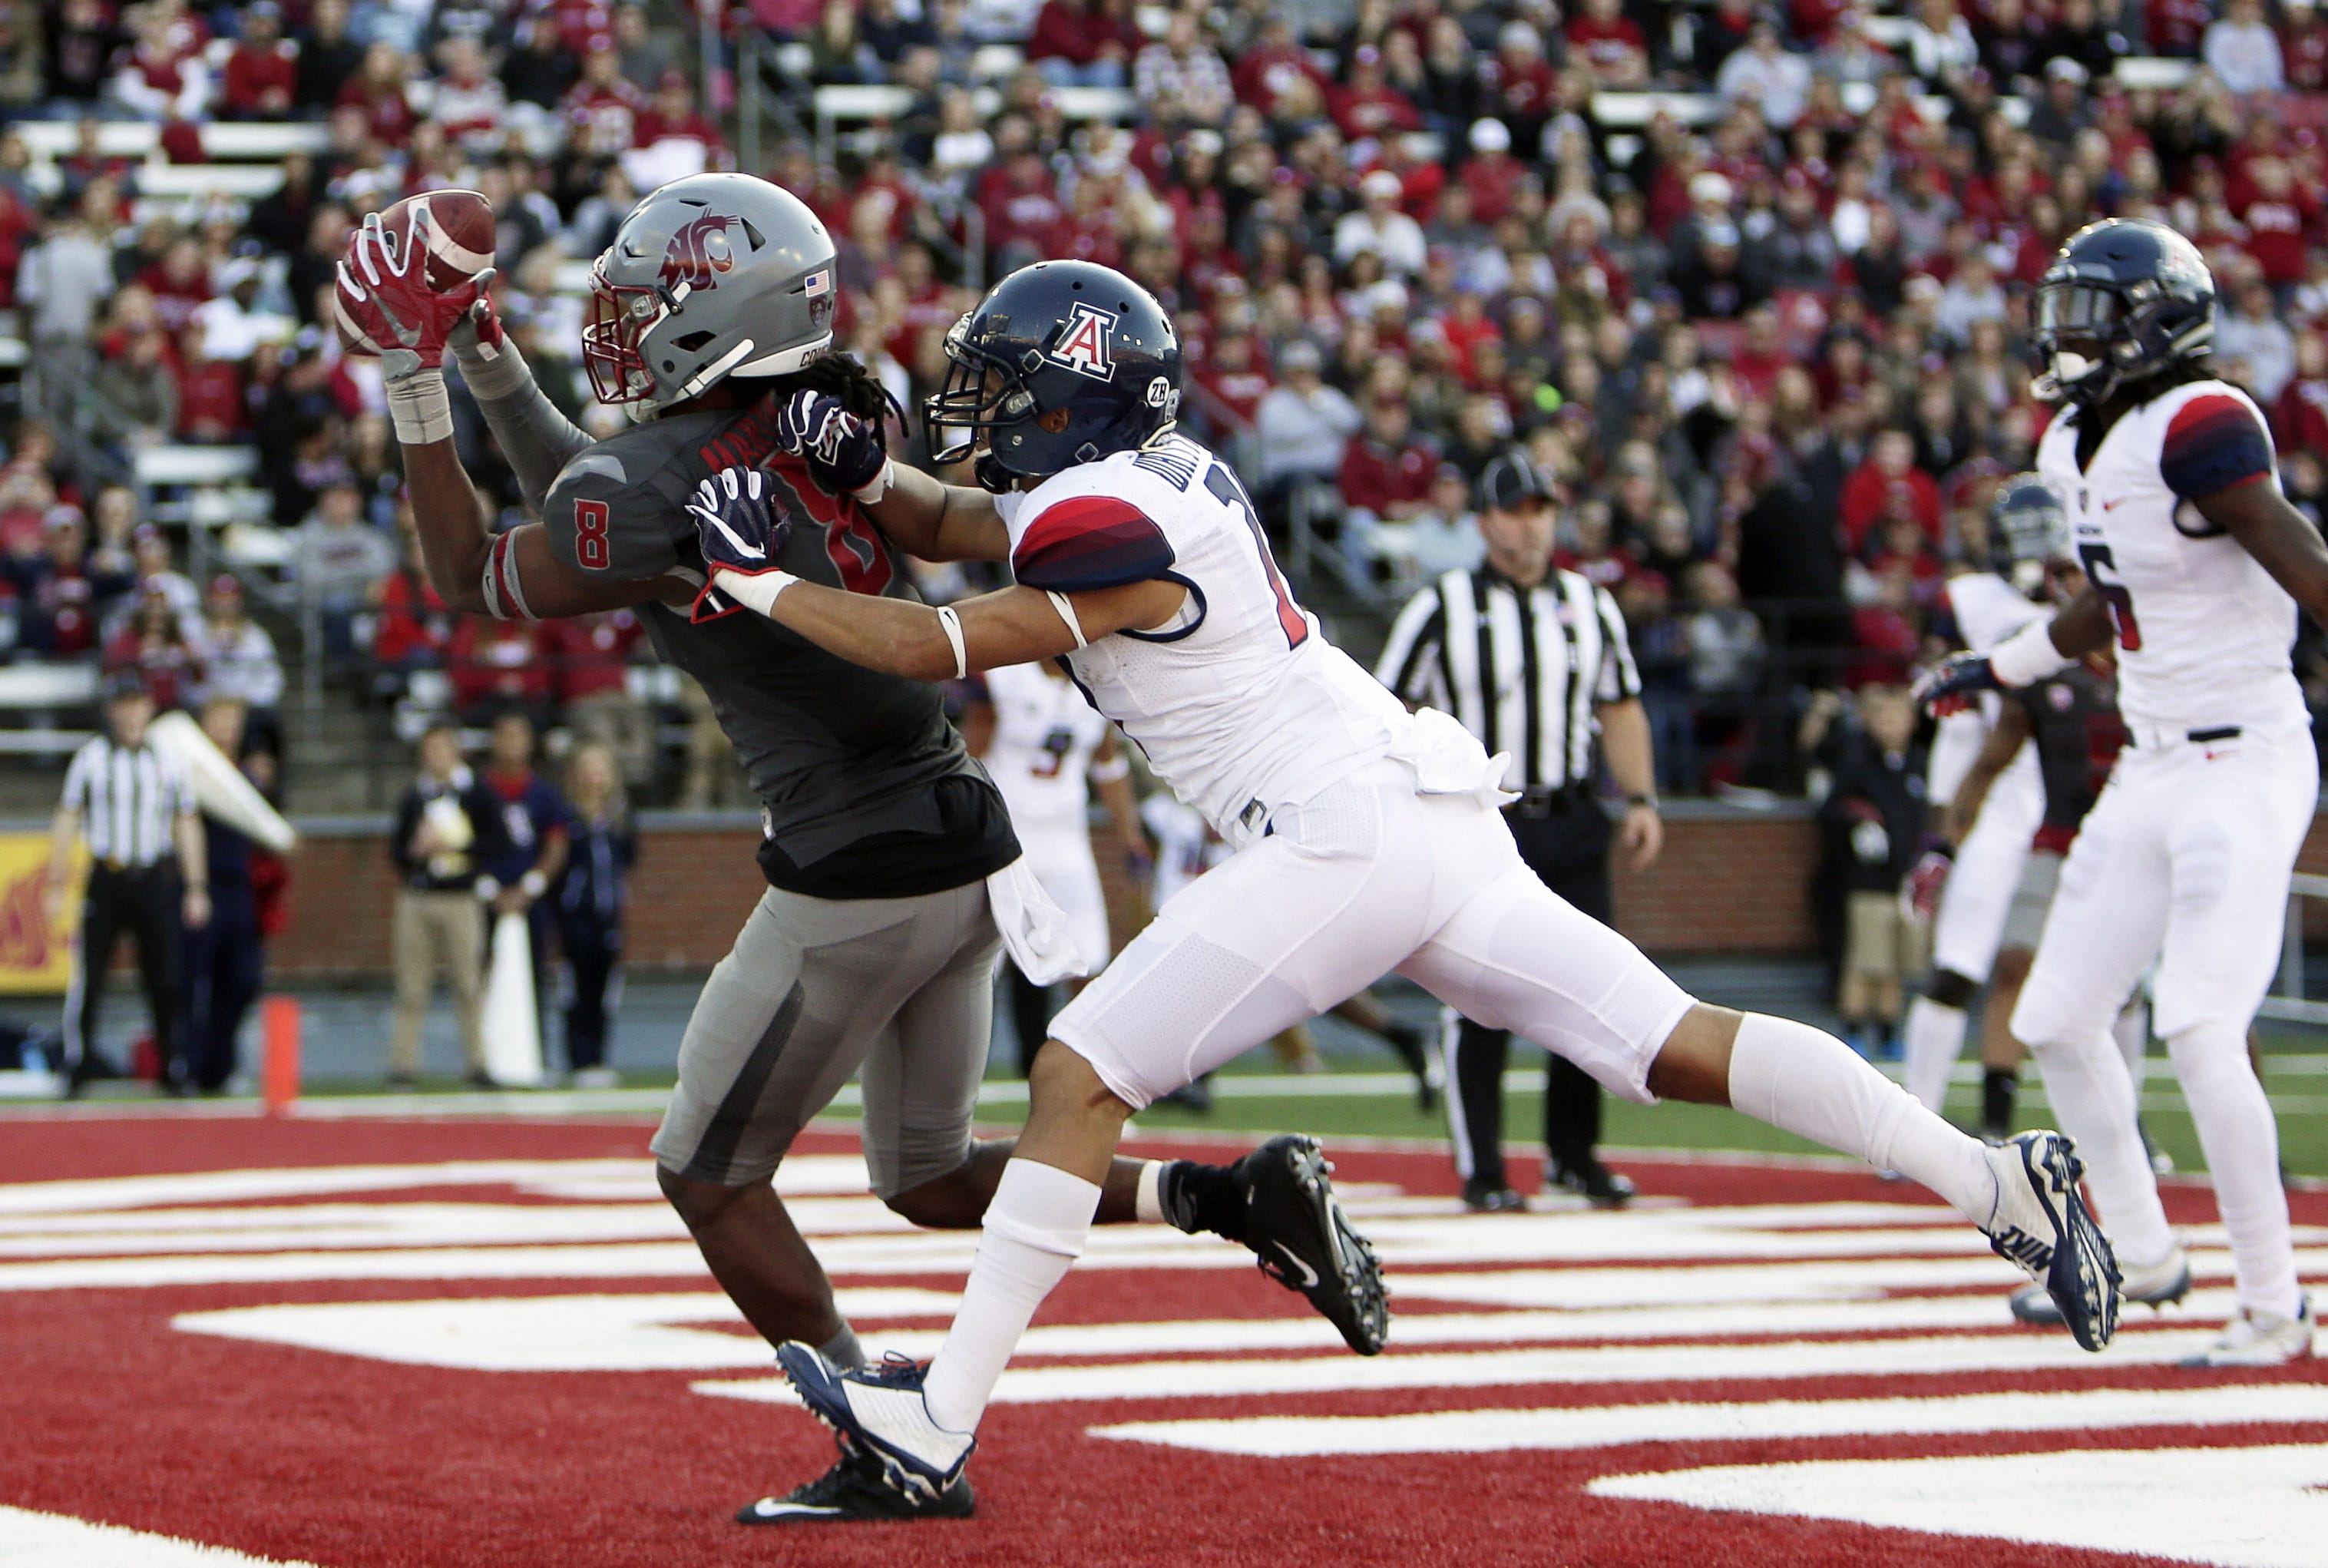 Washington State wide receiver Tavares Martin Jr. (8) catches a pass for a touchdown while defended by Arizona cornerback Jace Whittaker.